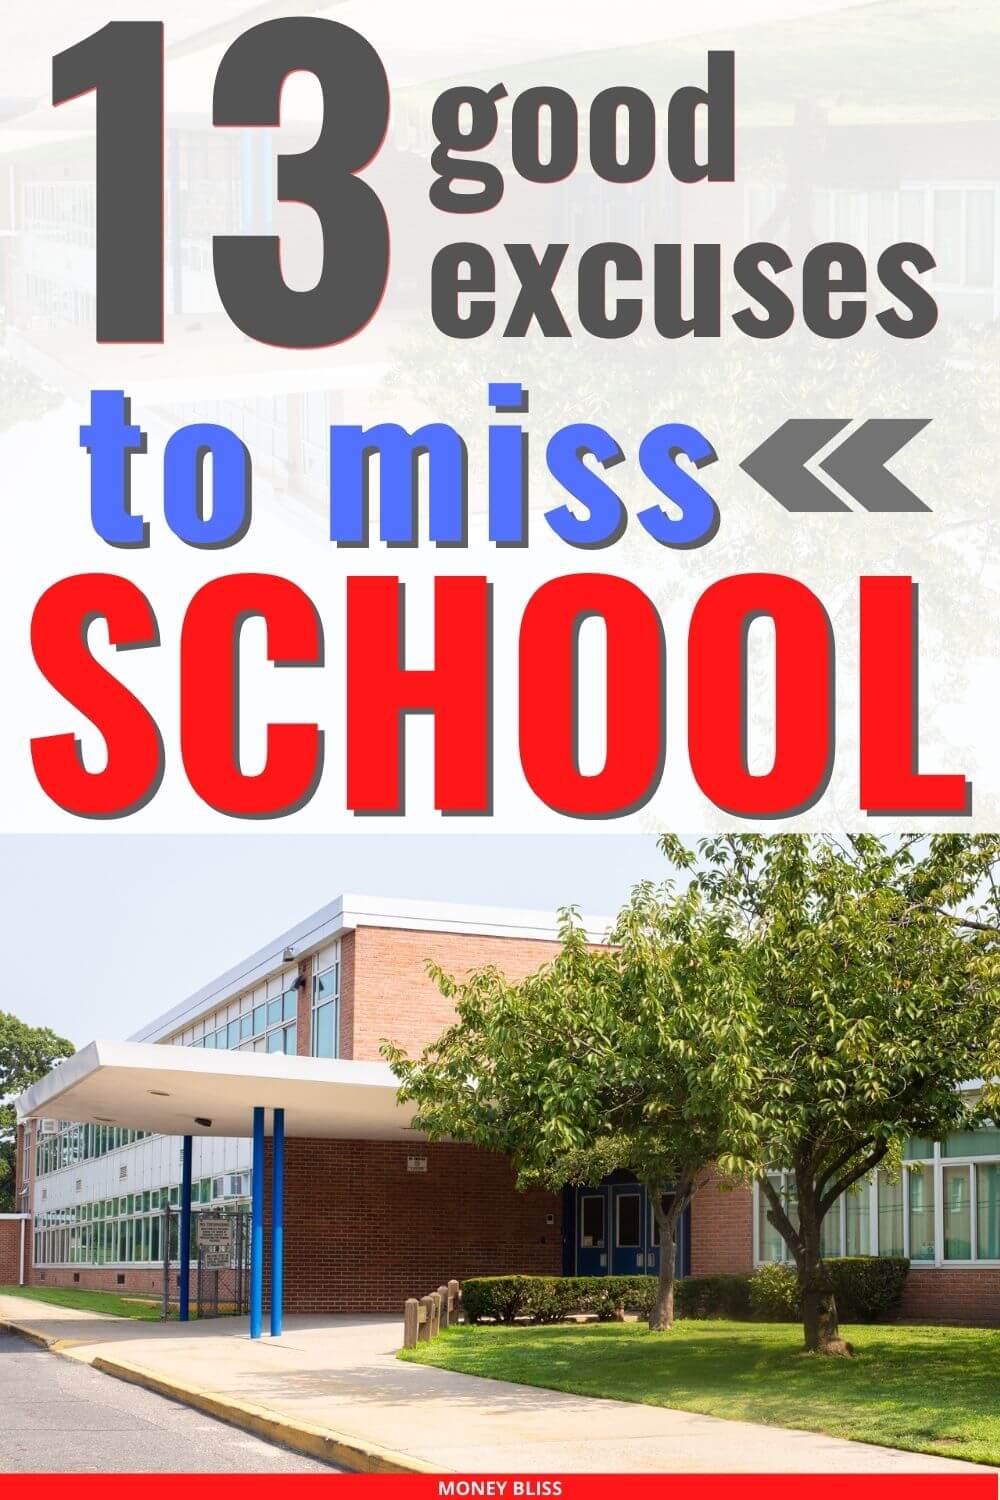 Do you want the best excuses ever for missing class? Find good excuses to miss school. This guide will teach you how to make legitimate excuses to miss school and avoid getting in trouble with parents.